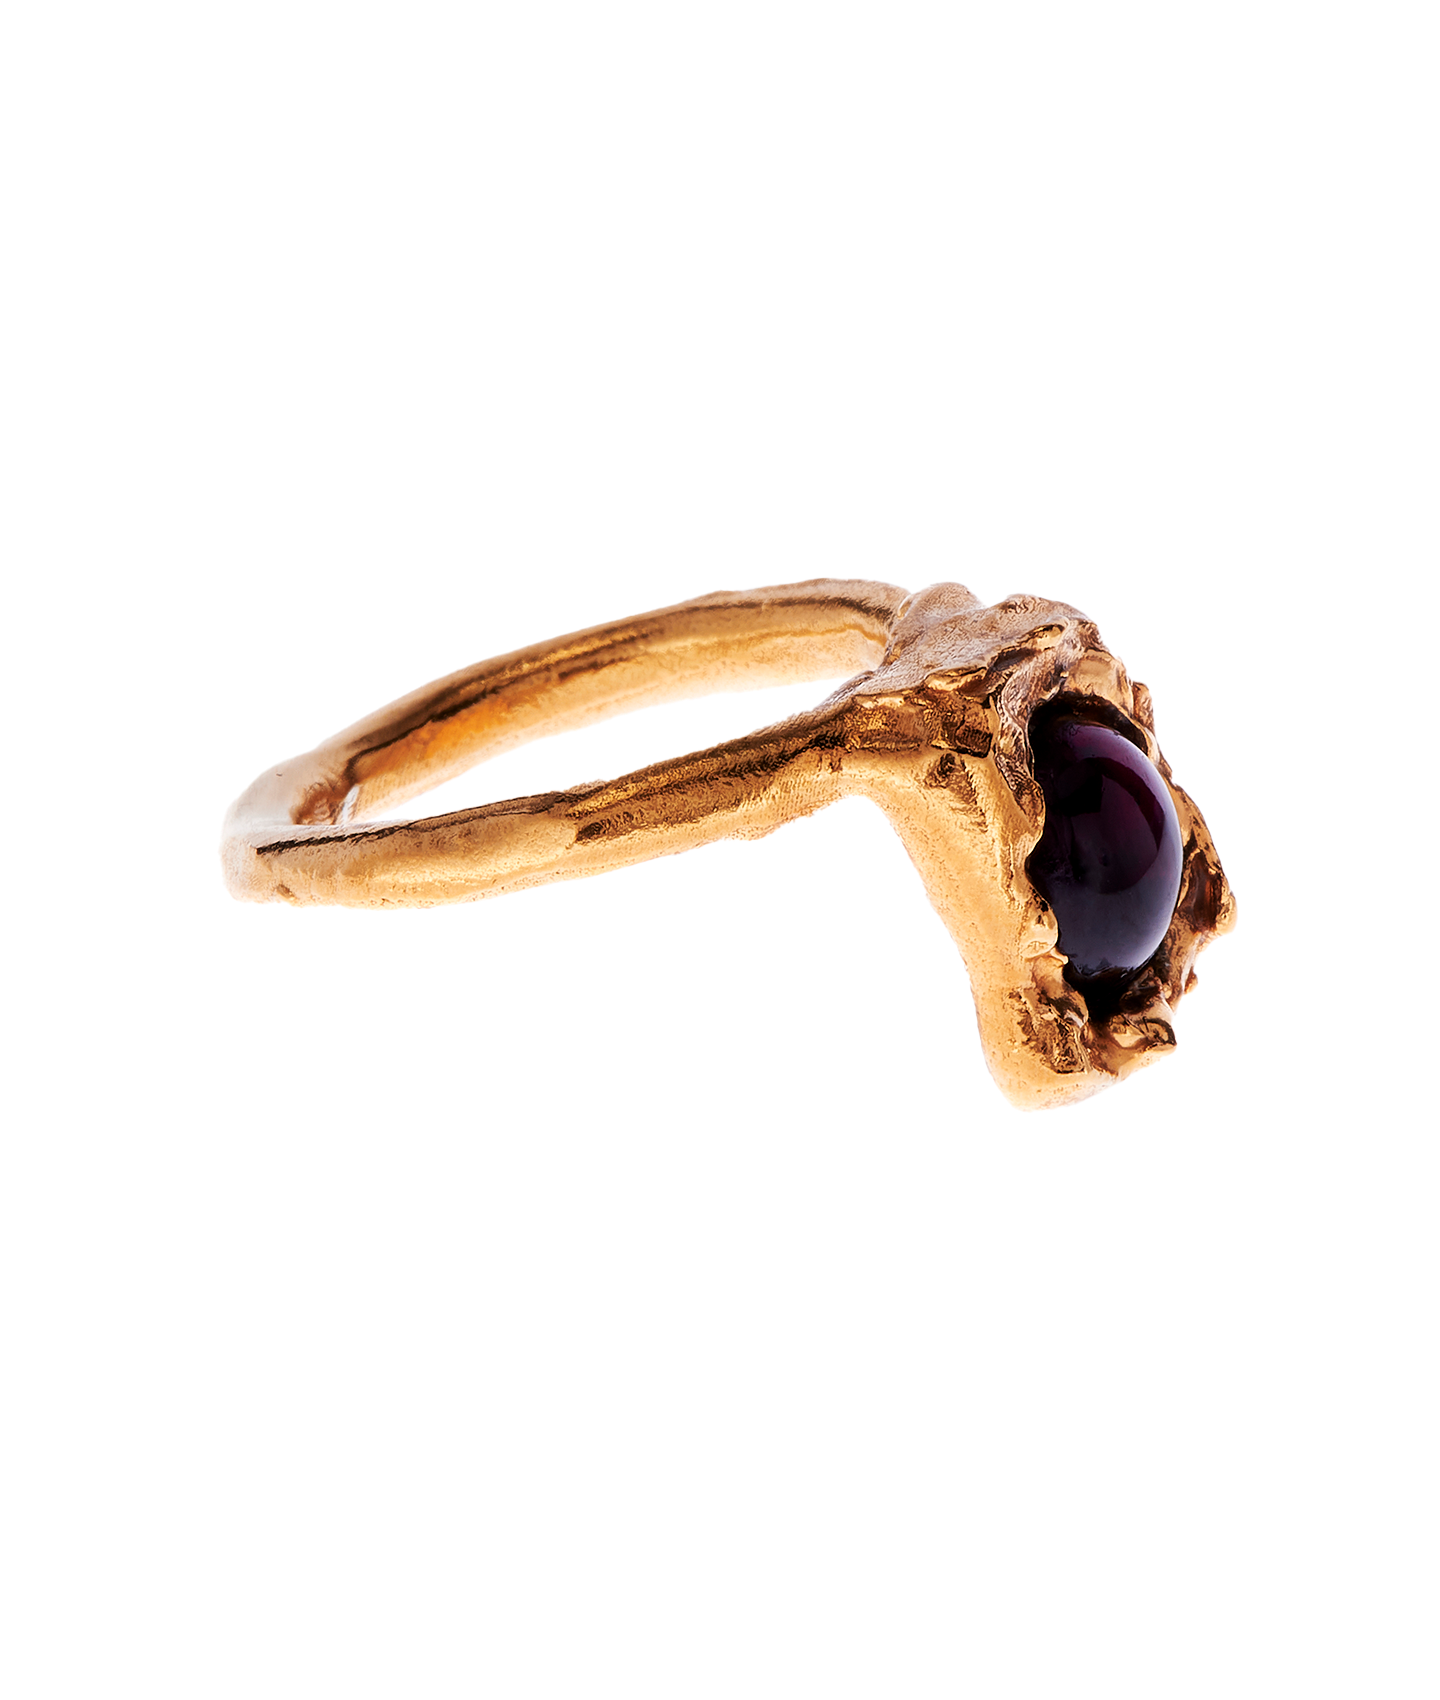 The Spark of Desire Ring